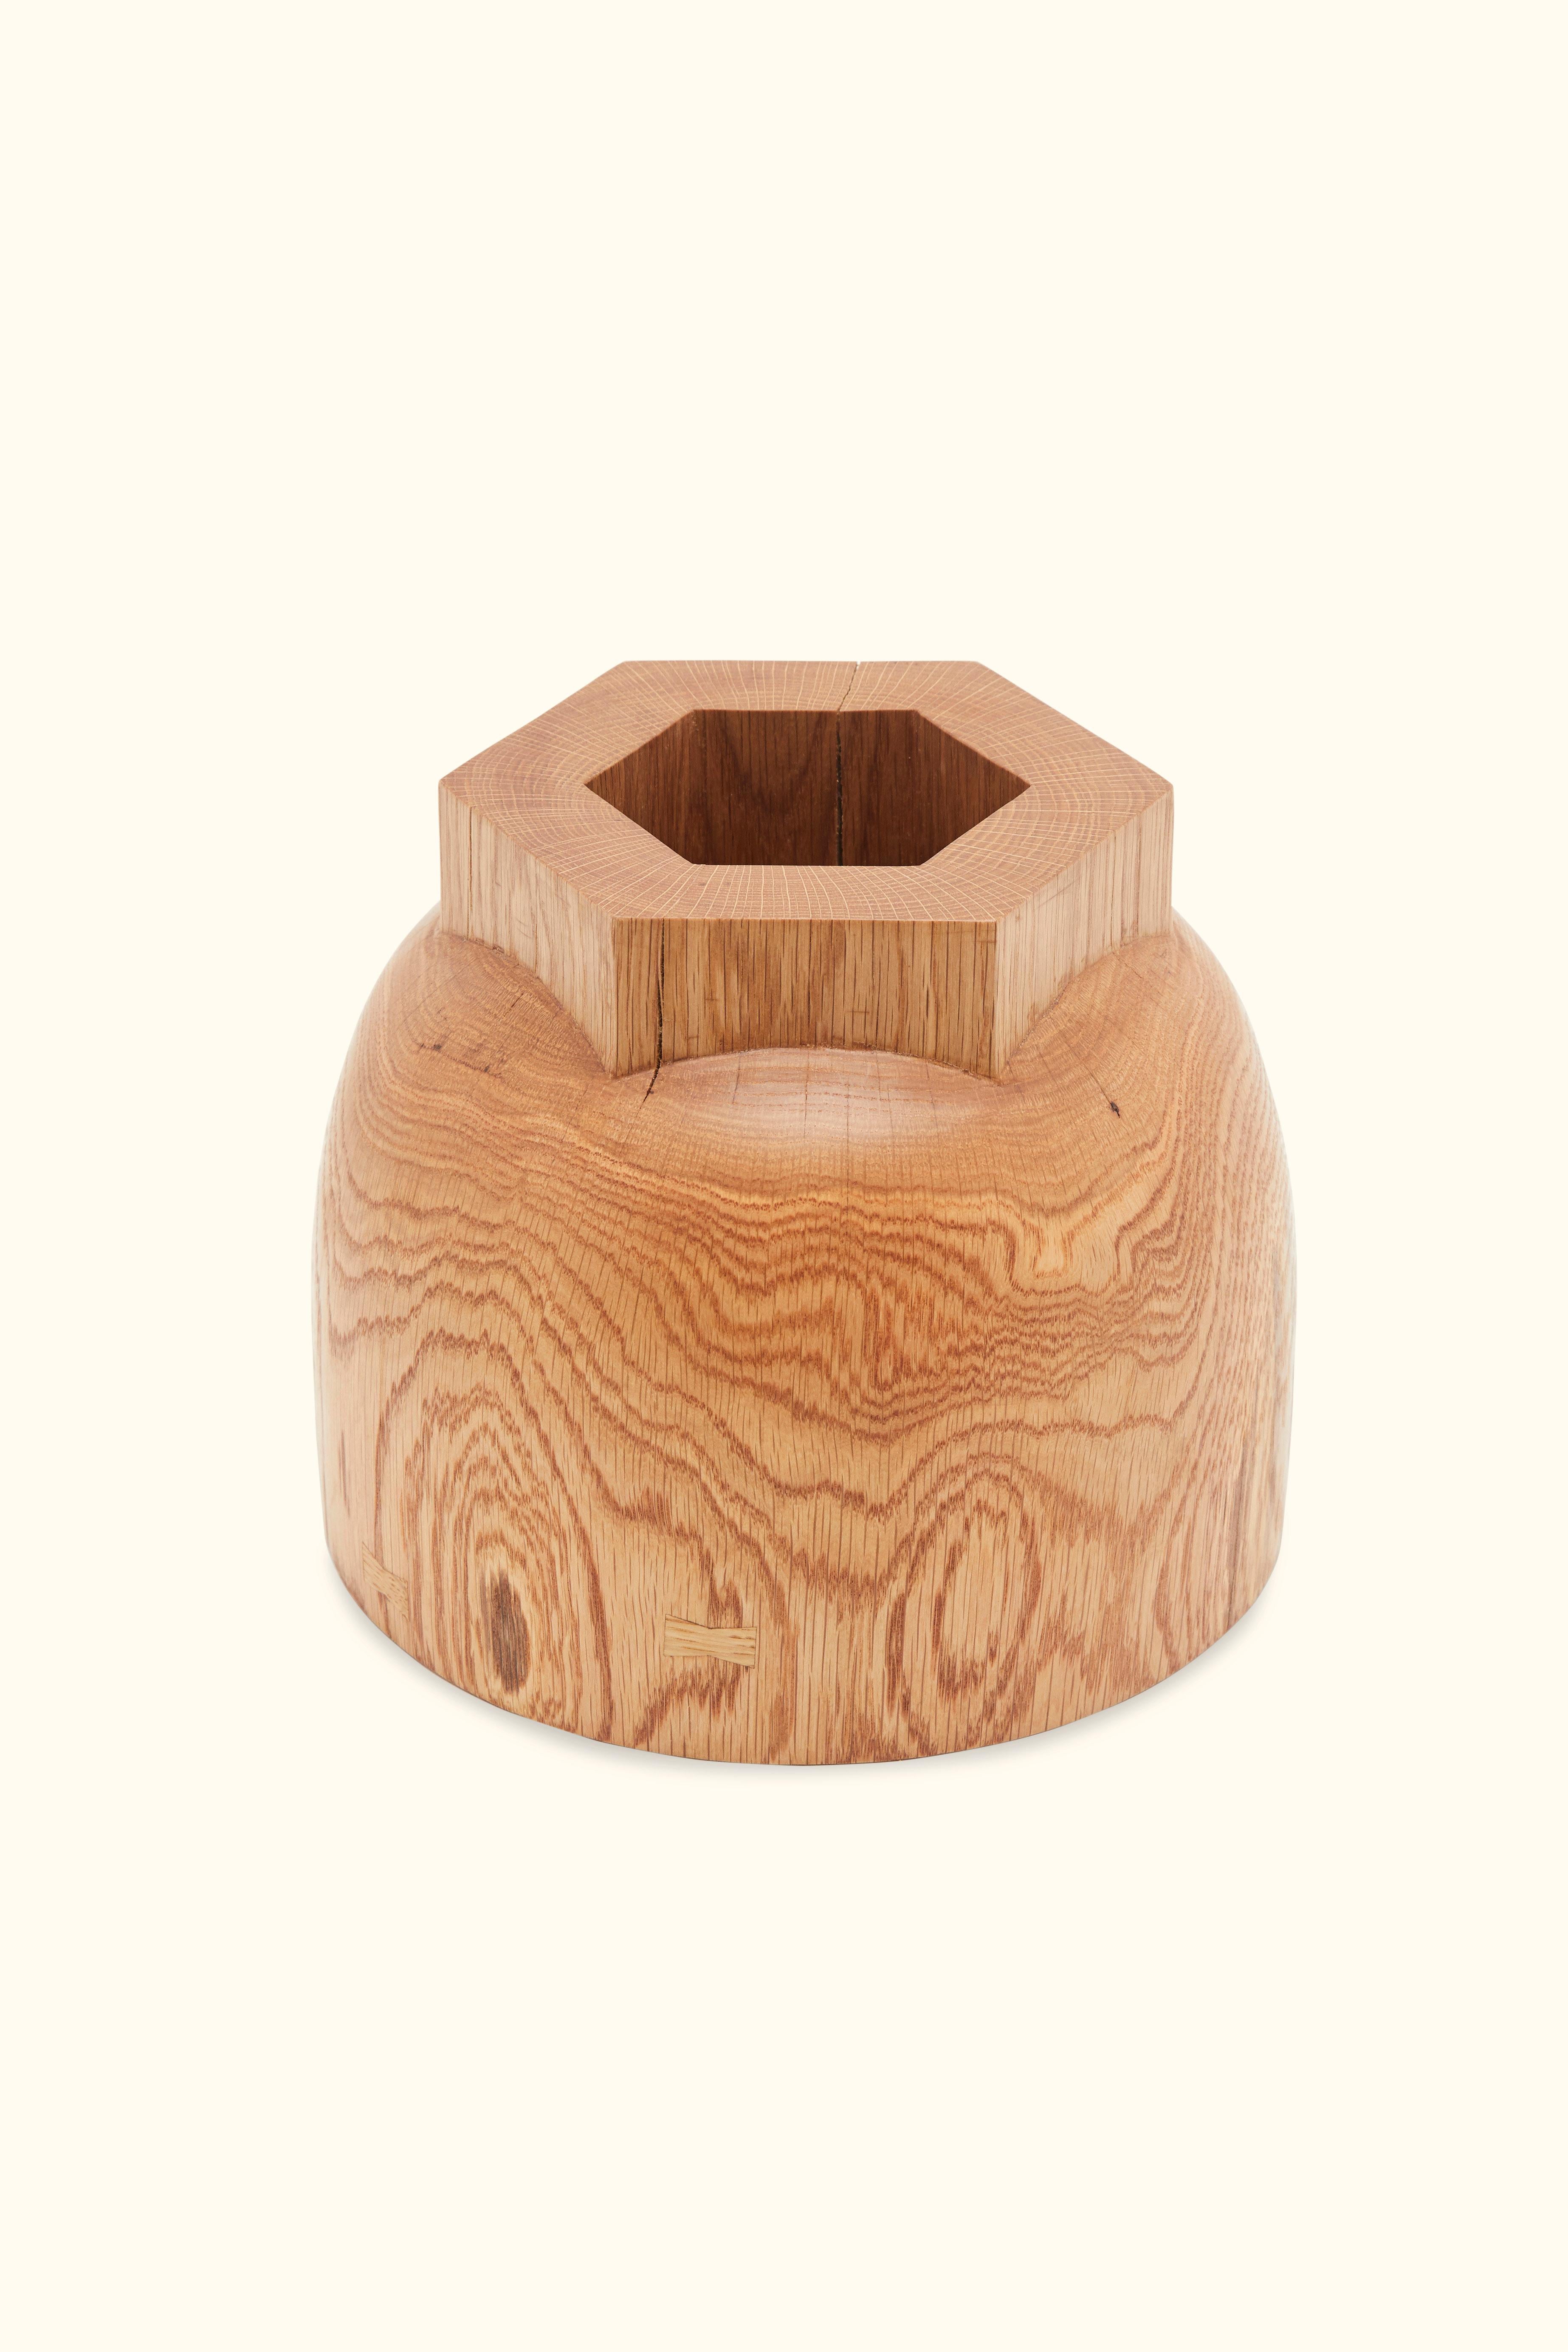 Hex rimmed vessel by Wyatt Speight Rhue.

Wood species, dimensions, color and grain pattern may vary.